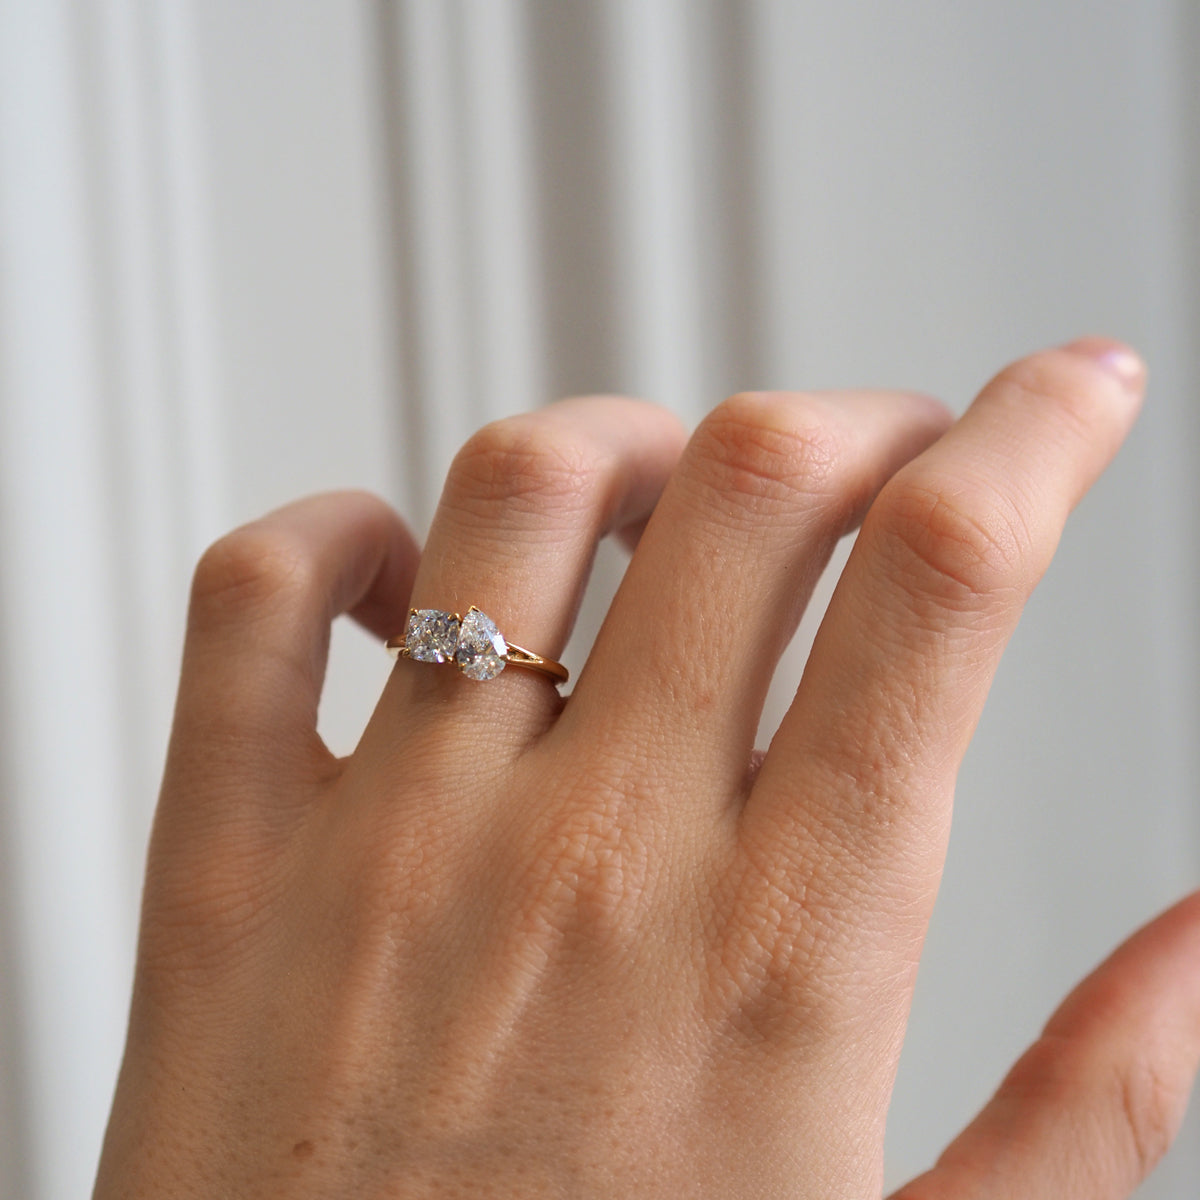 What Finger Do You Wear a Promise Ring On? | LoveToKnow